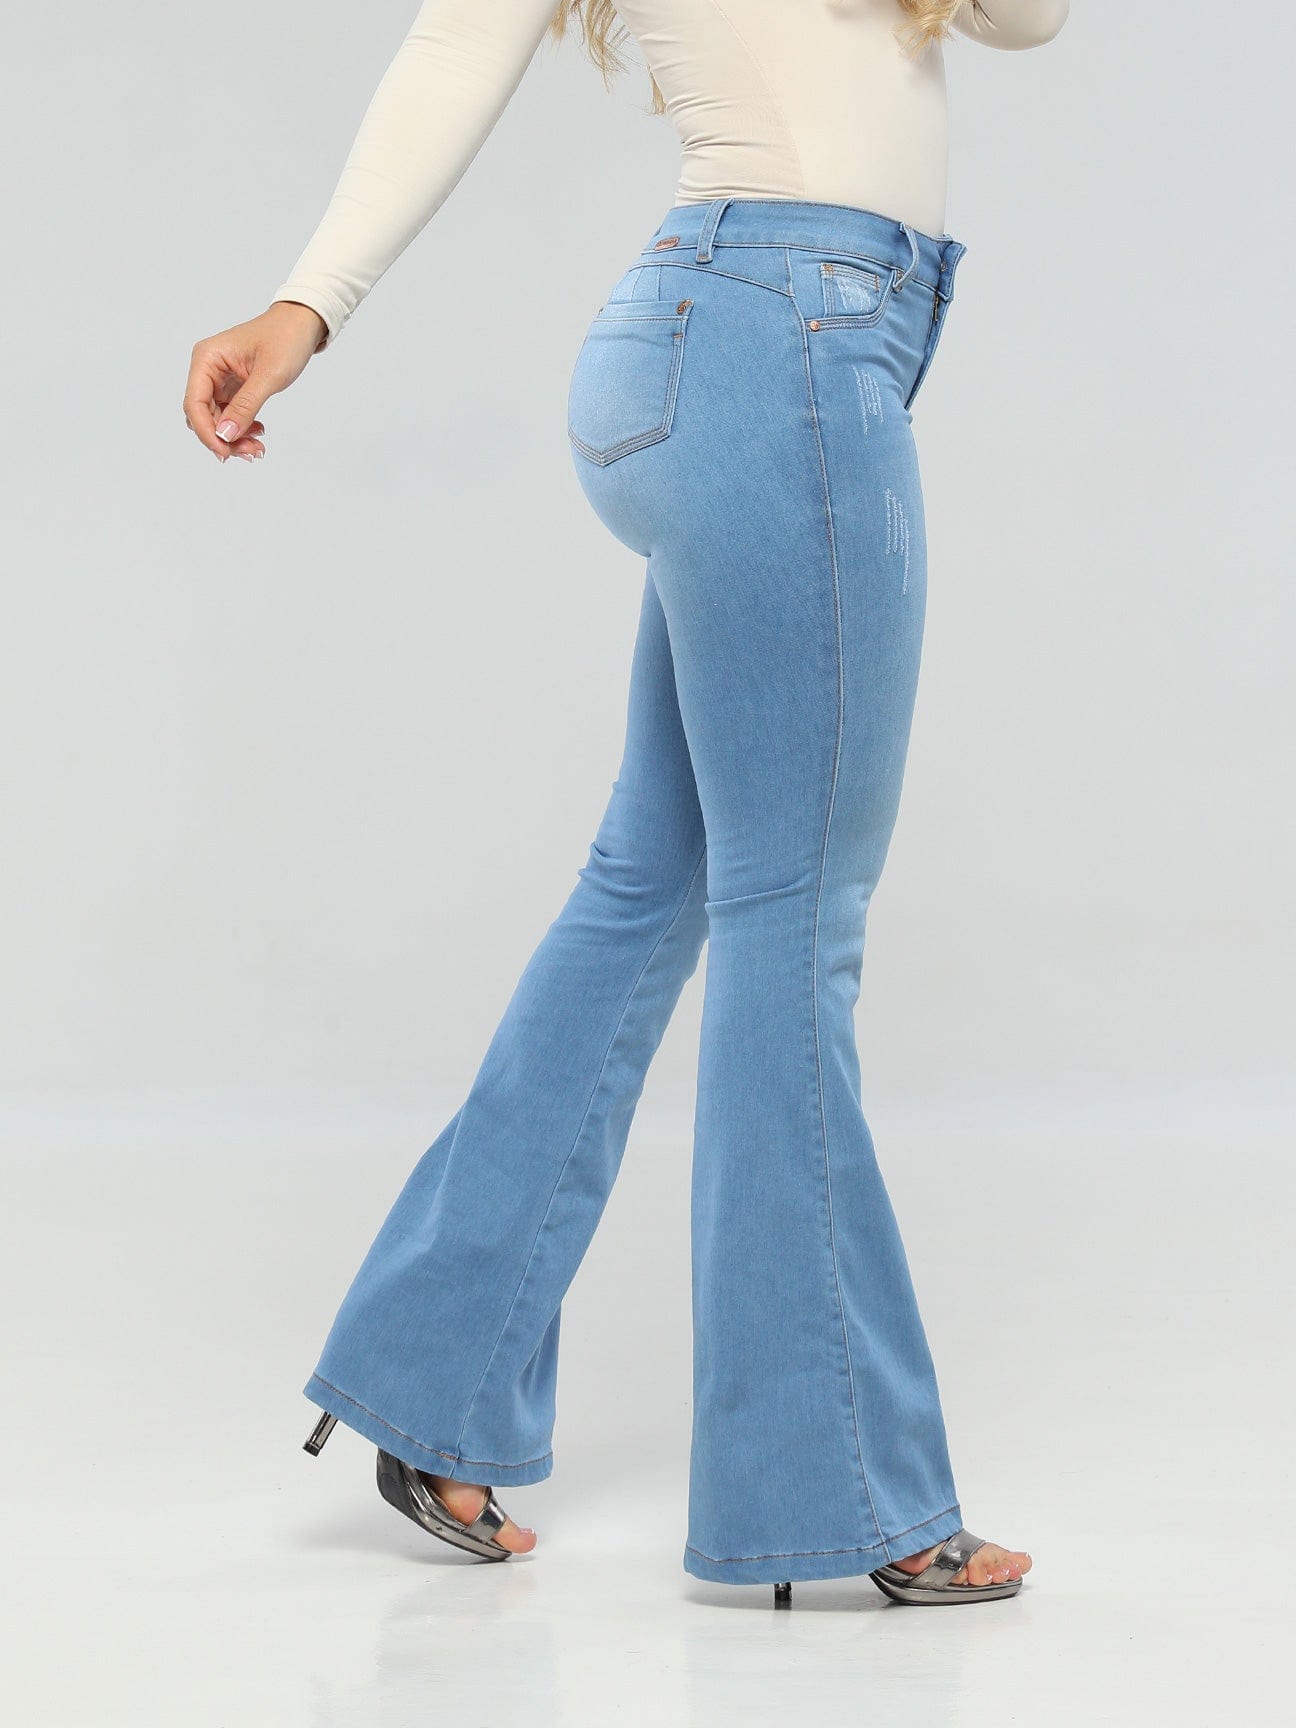 Stylish & Hot skinny jeans colombianos at Affordable Prices 